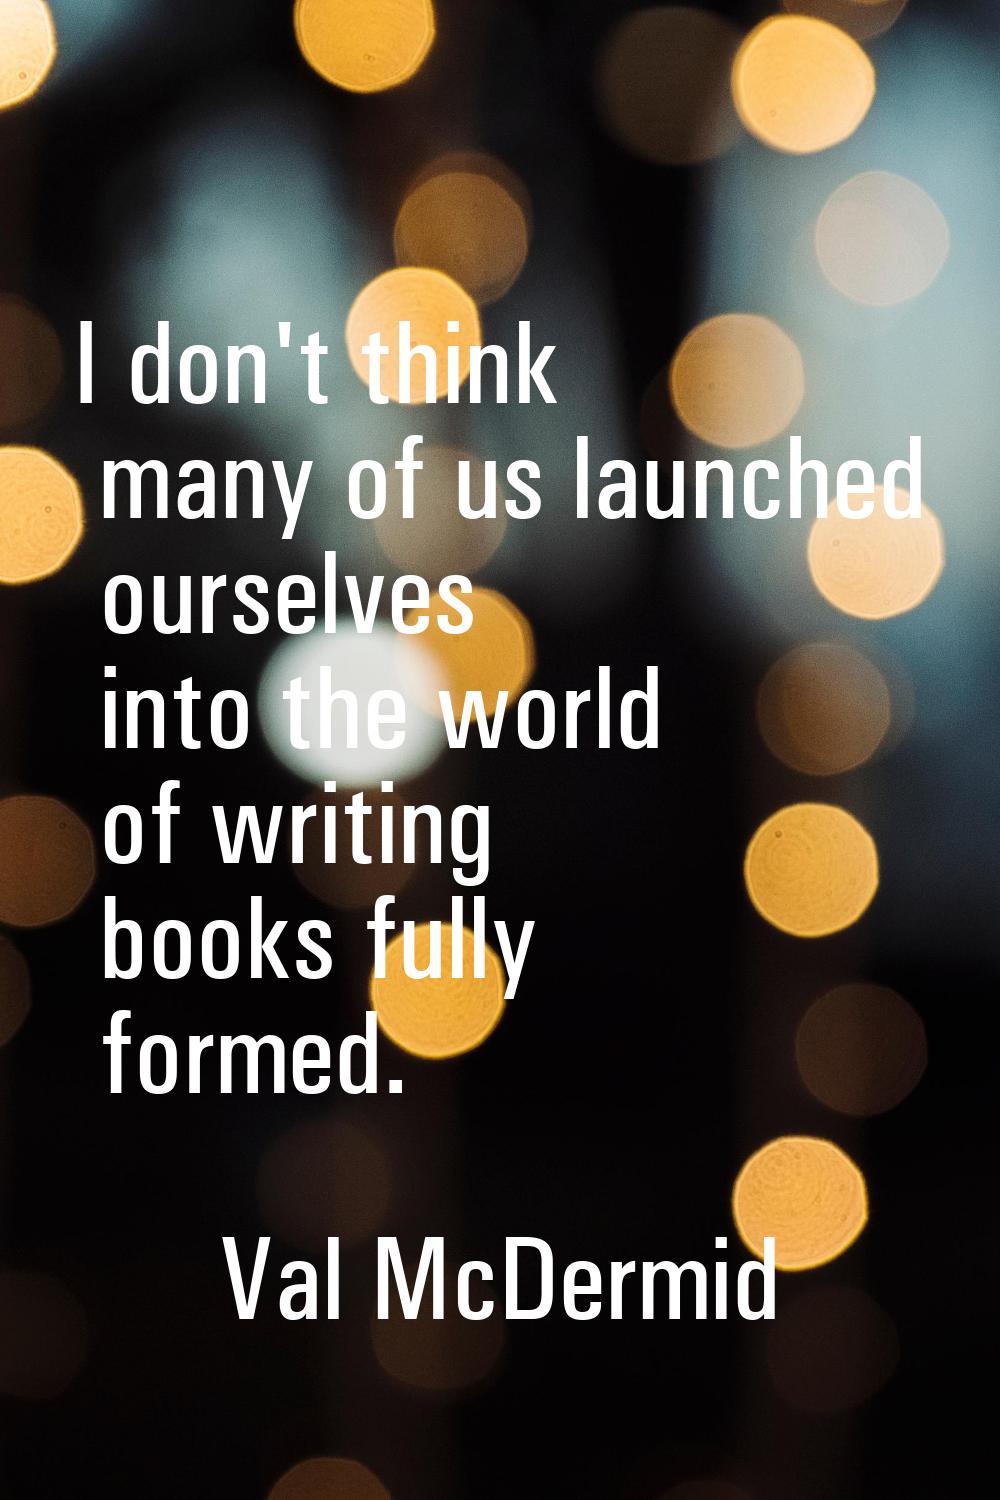 I don't think many of us launched ourselves into the world of writing books fully formed.